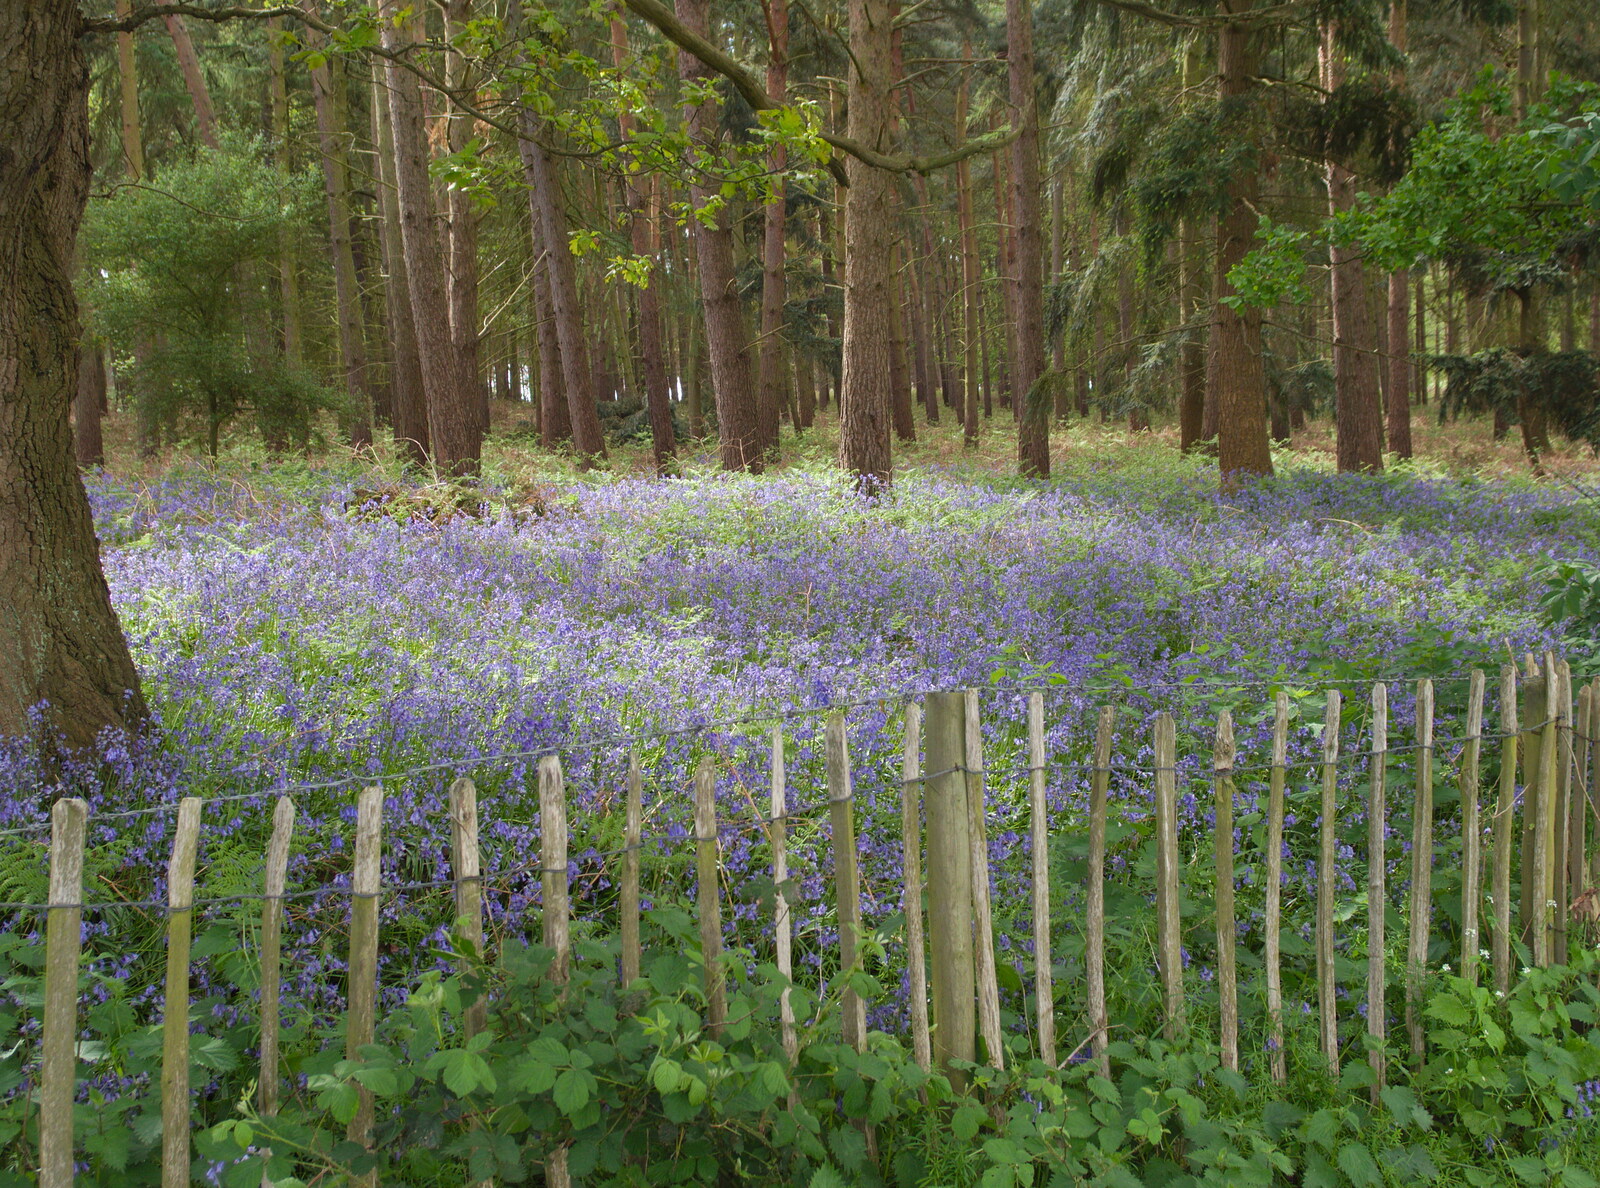 More bluebells from A Return to Bedford: the BSCC Annual Weekend Away, Shefford, Bedfordshire - 10th May 2014